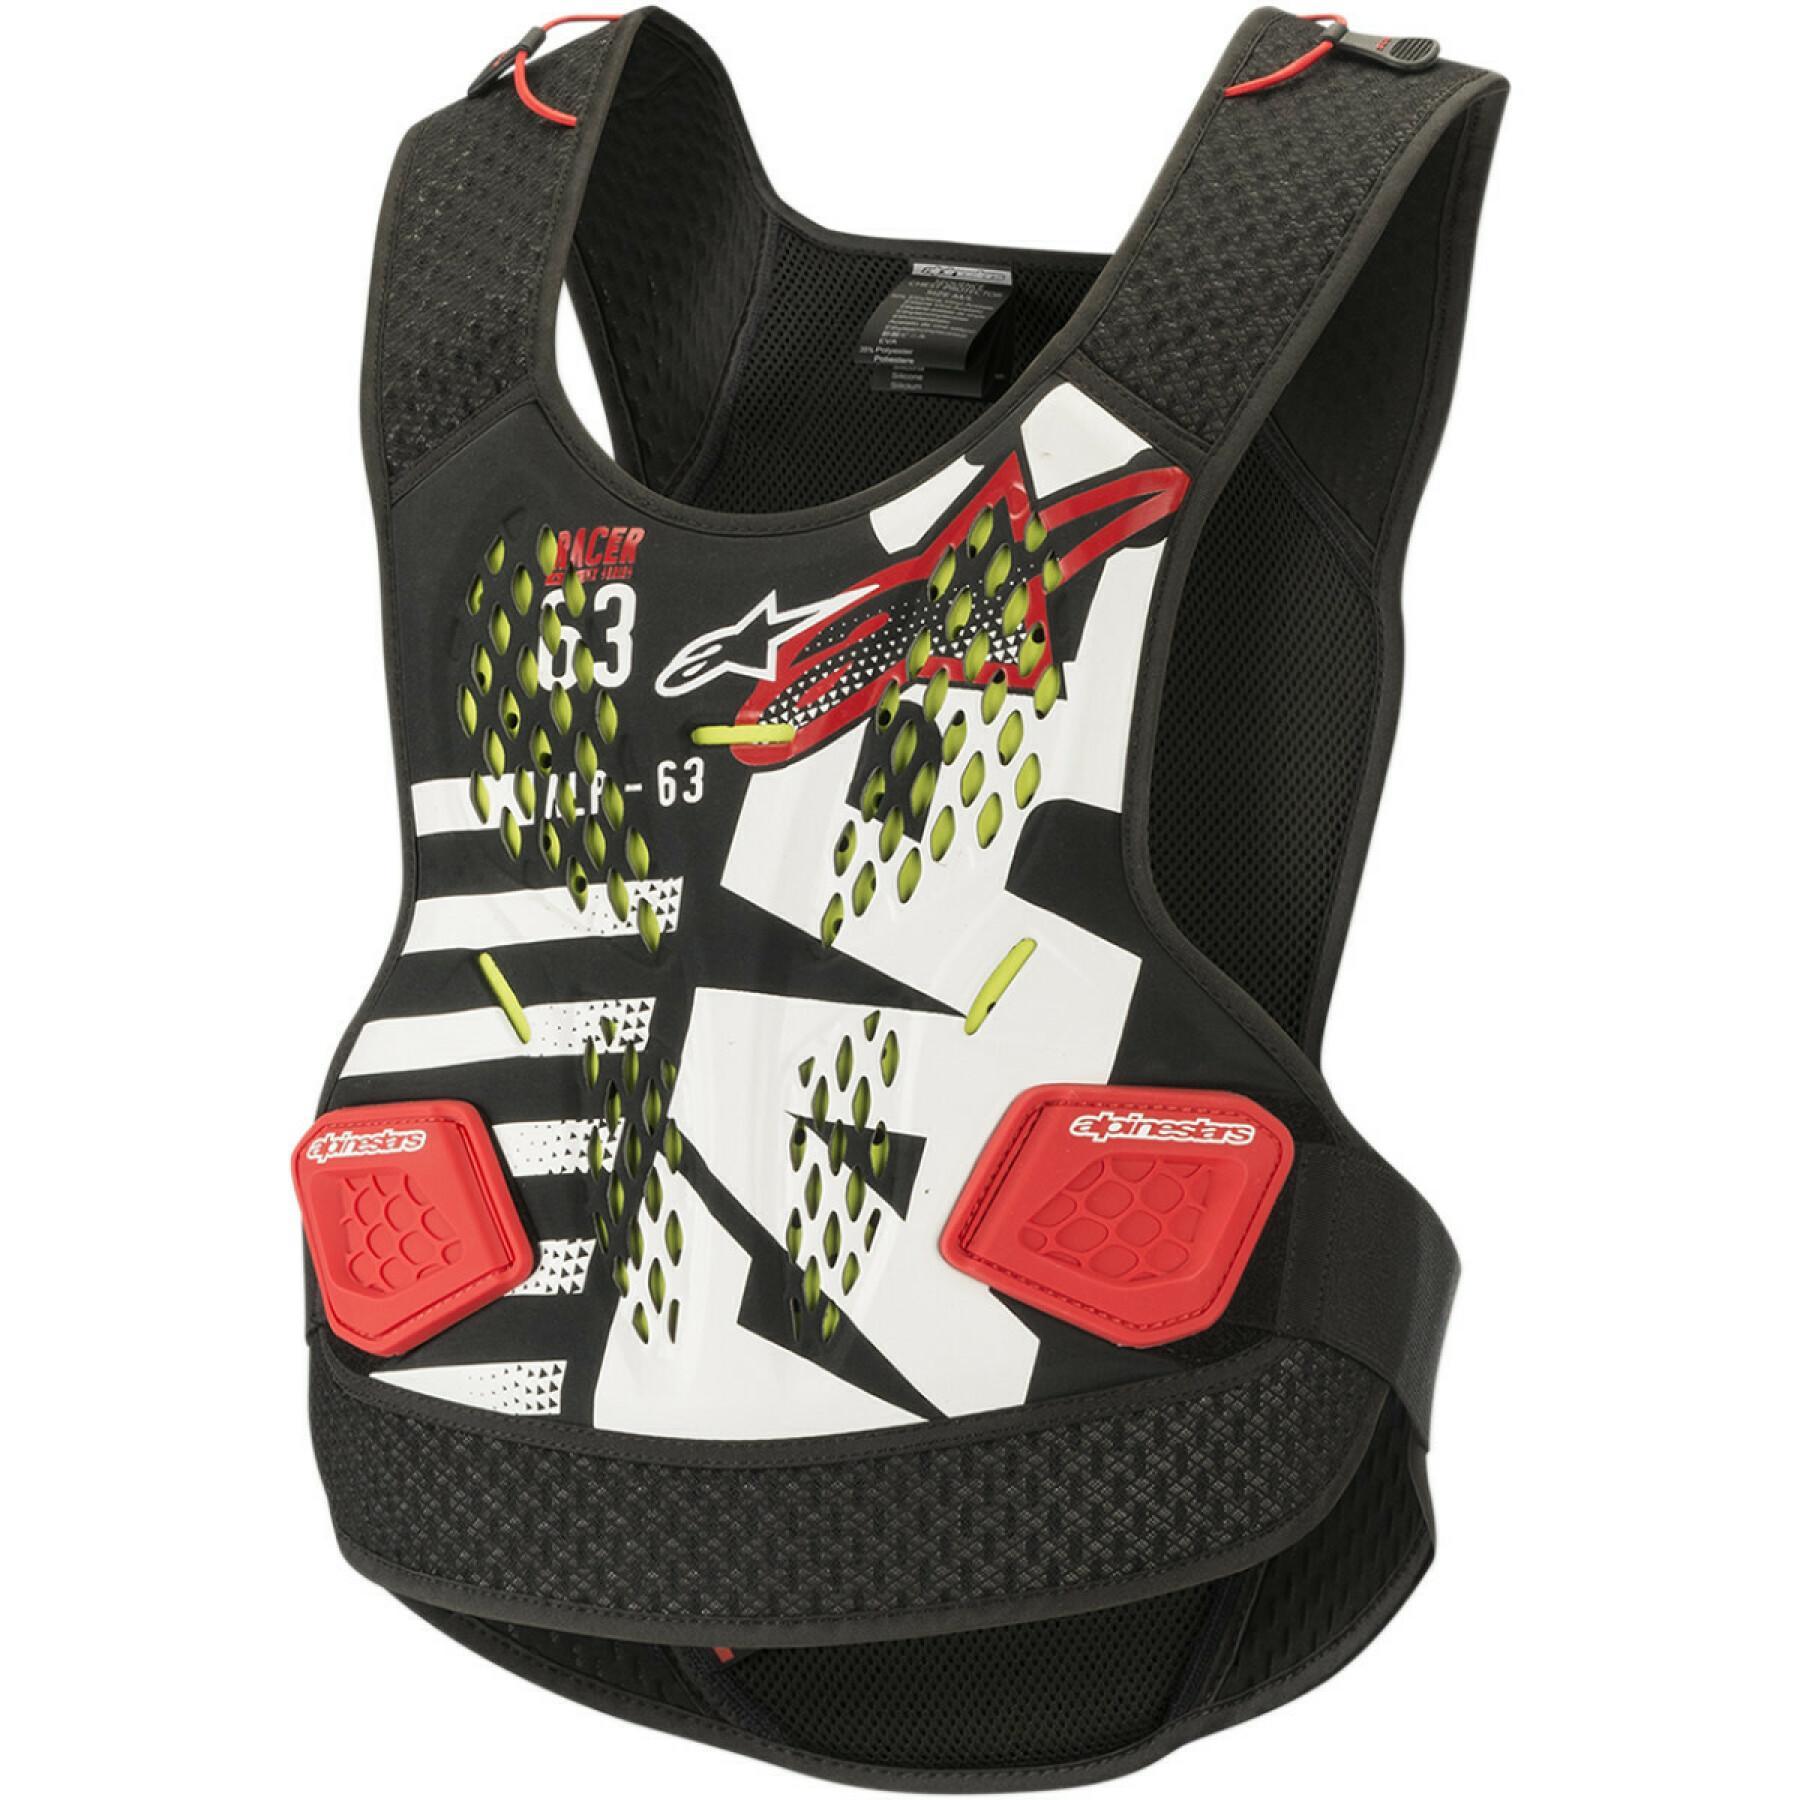 Stone guard motorcycle cross Alpinestars roost guard sequence